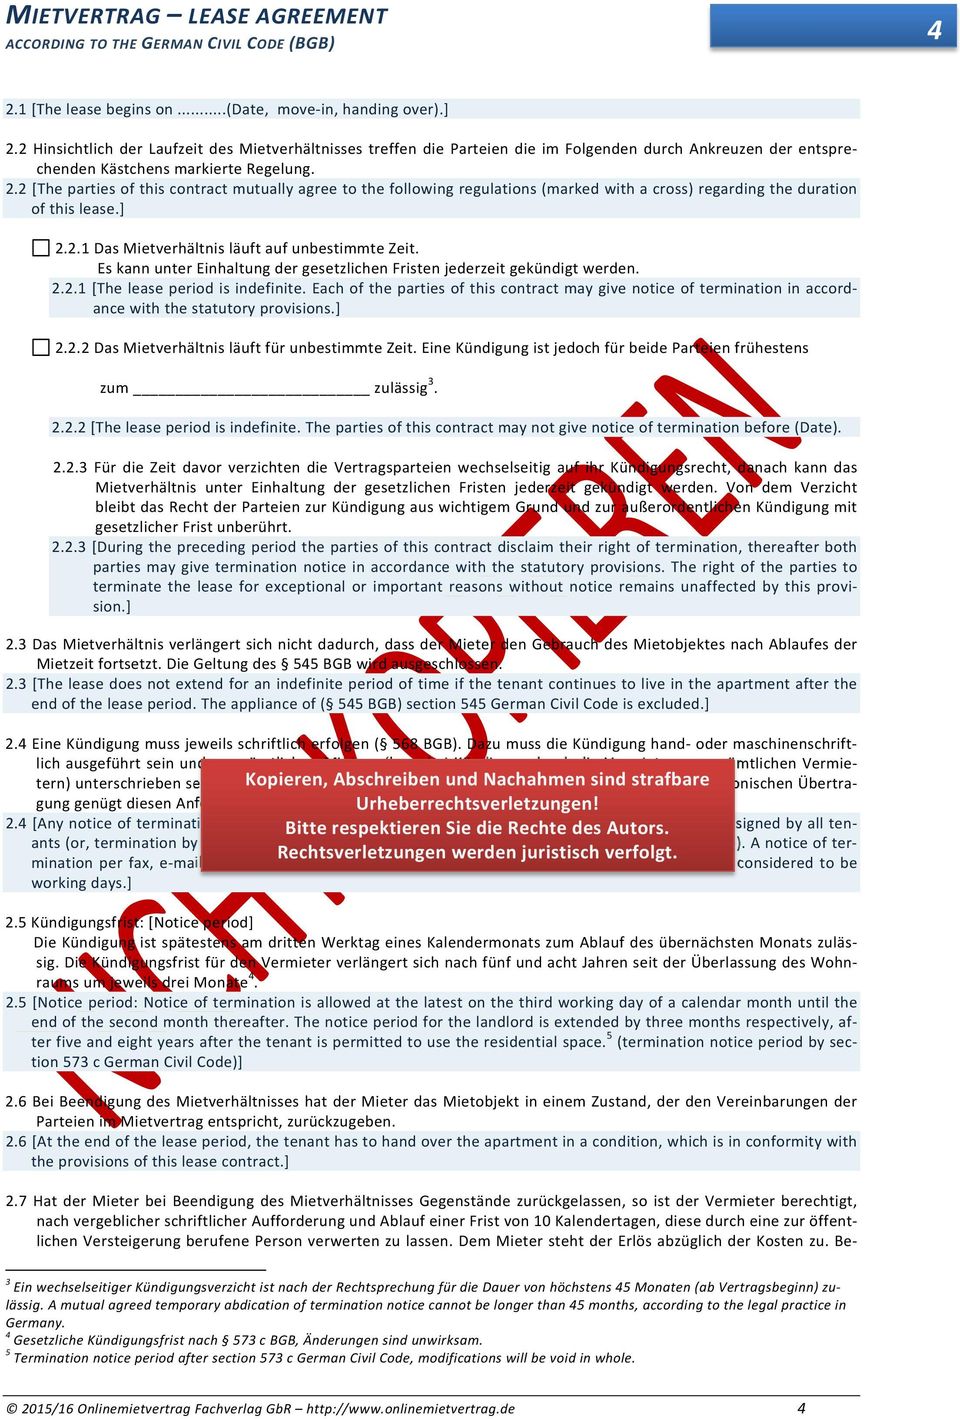 2 [The parties of this contract mutually agree to the following regulations (marked with a cross) regarding the duration of this lease.] 2.2.1 Das Mietverhältnis läuft auf unbestimmte Zeit.